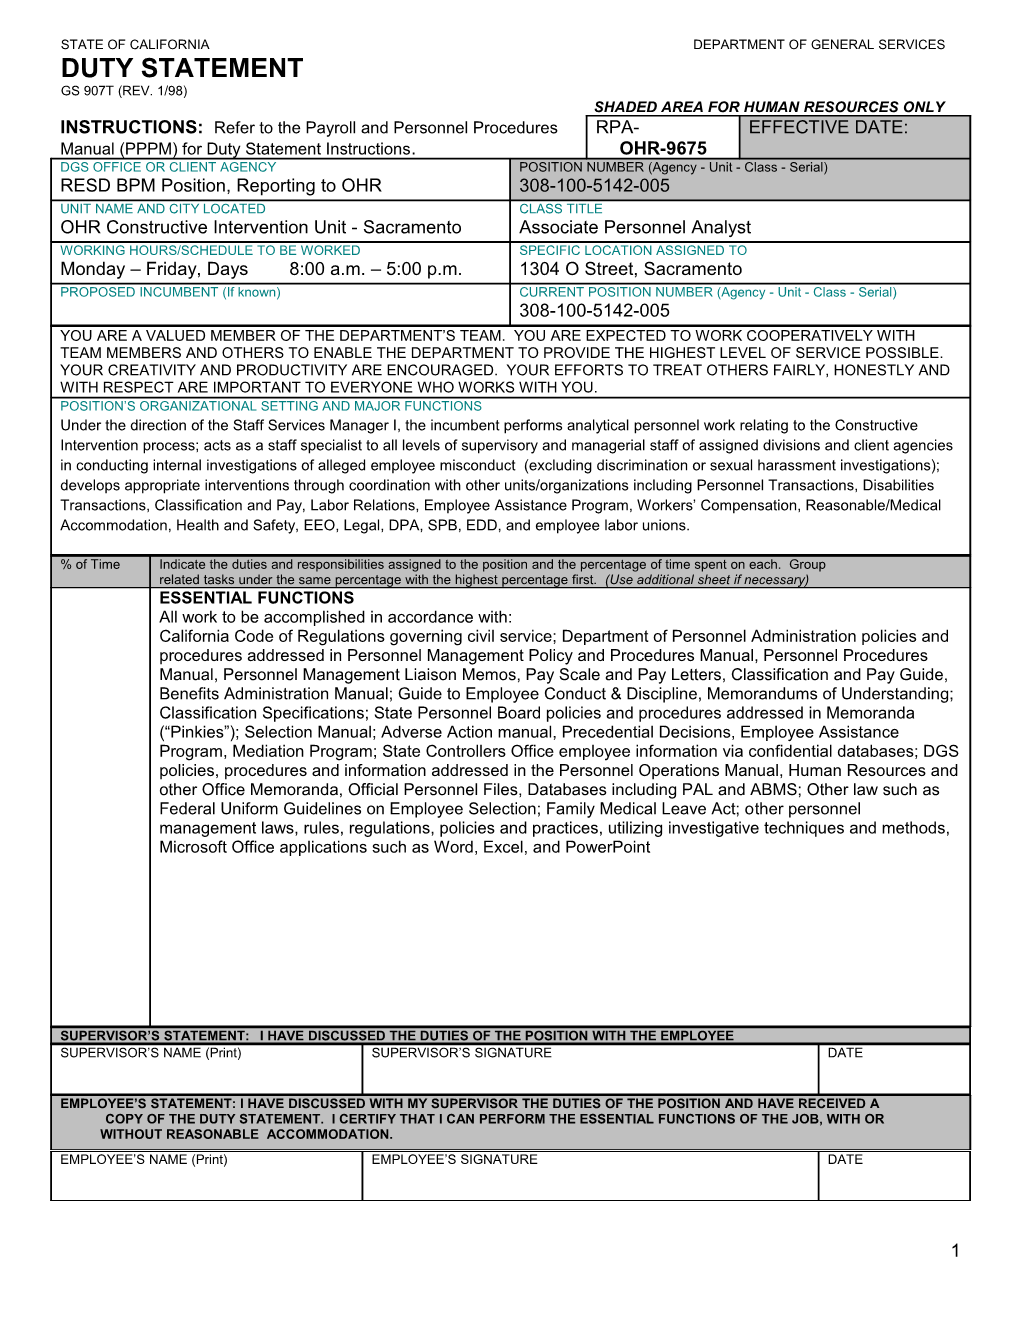 State of California Department of General Services s15